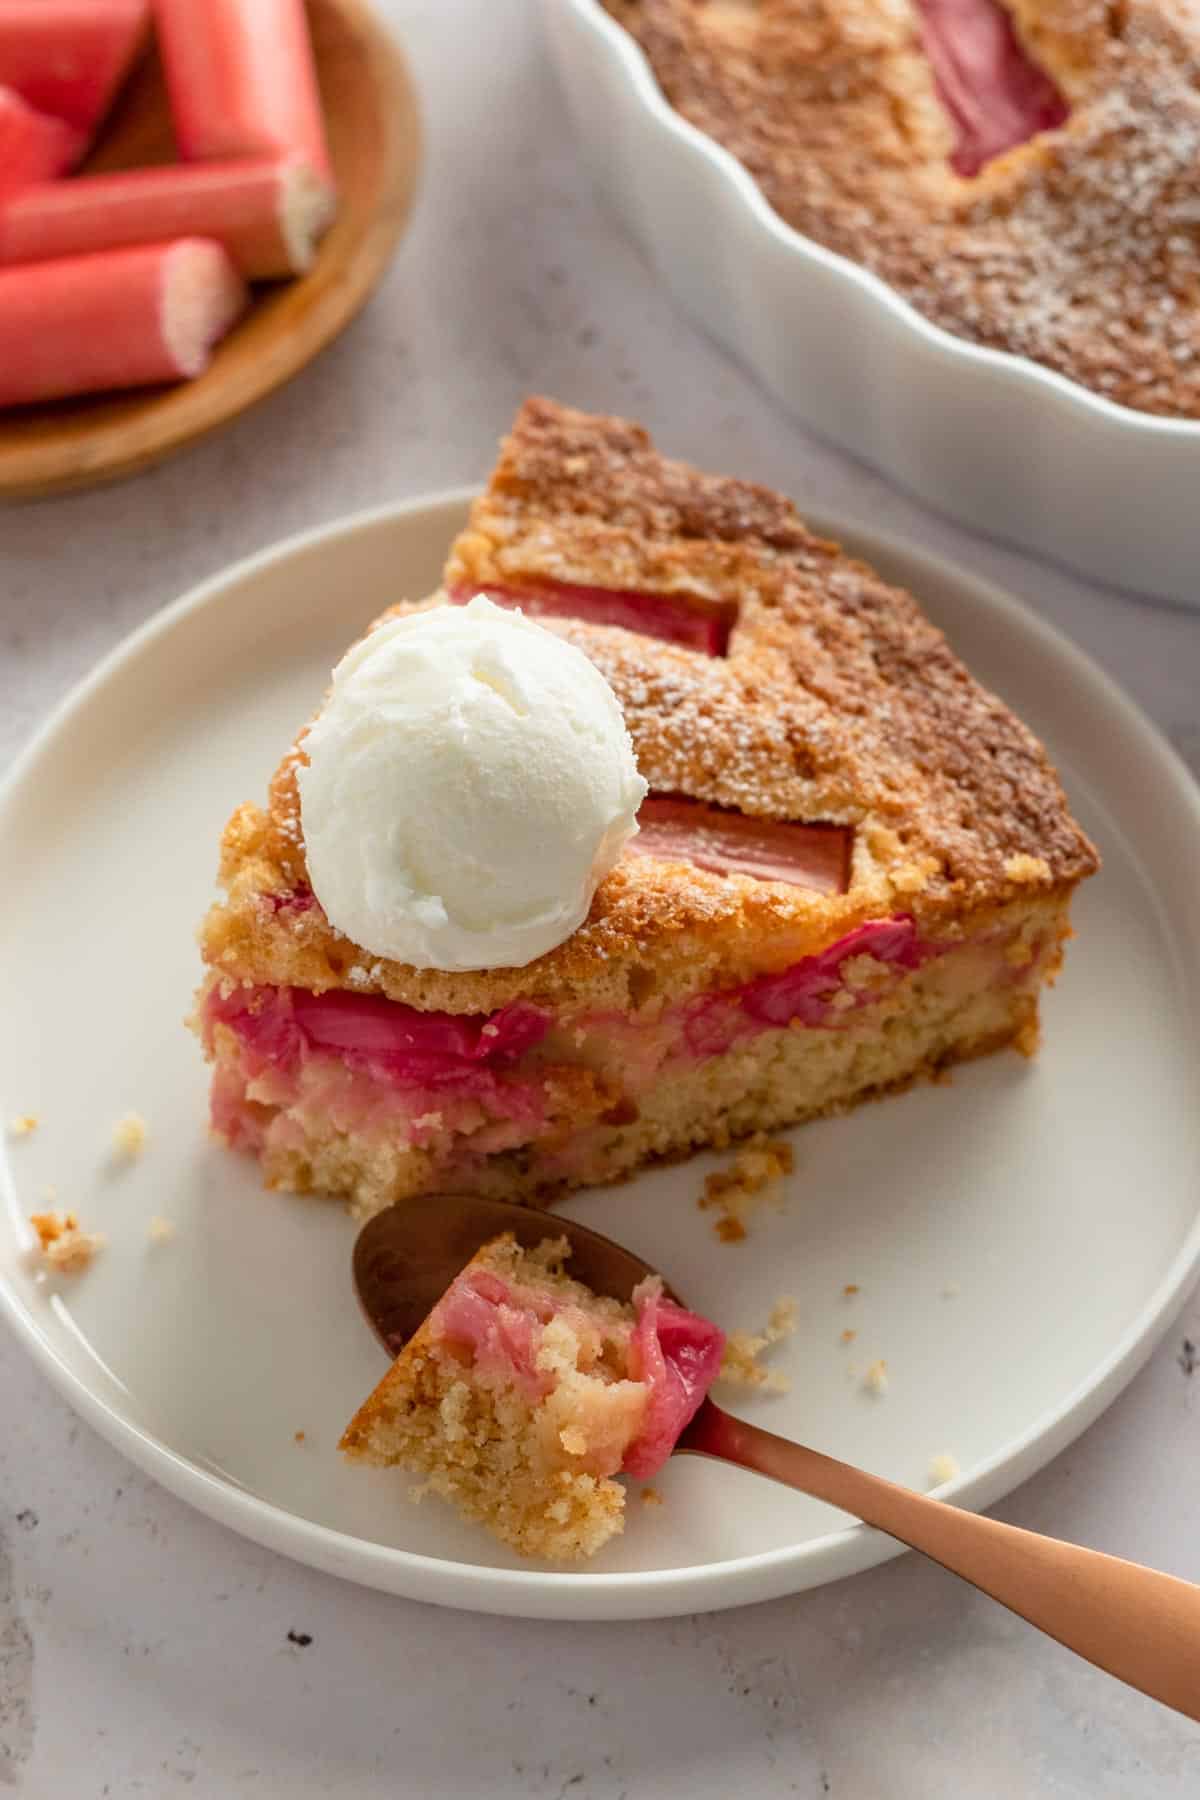 a slice of rhubarb pie with a scoop of vanilla ice cream on top